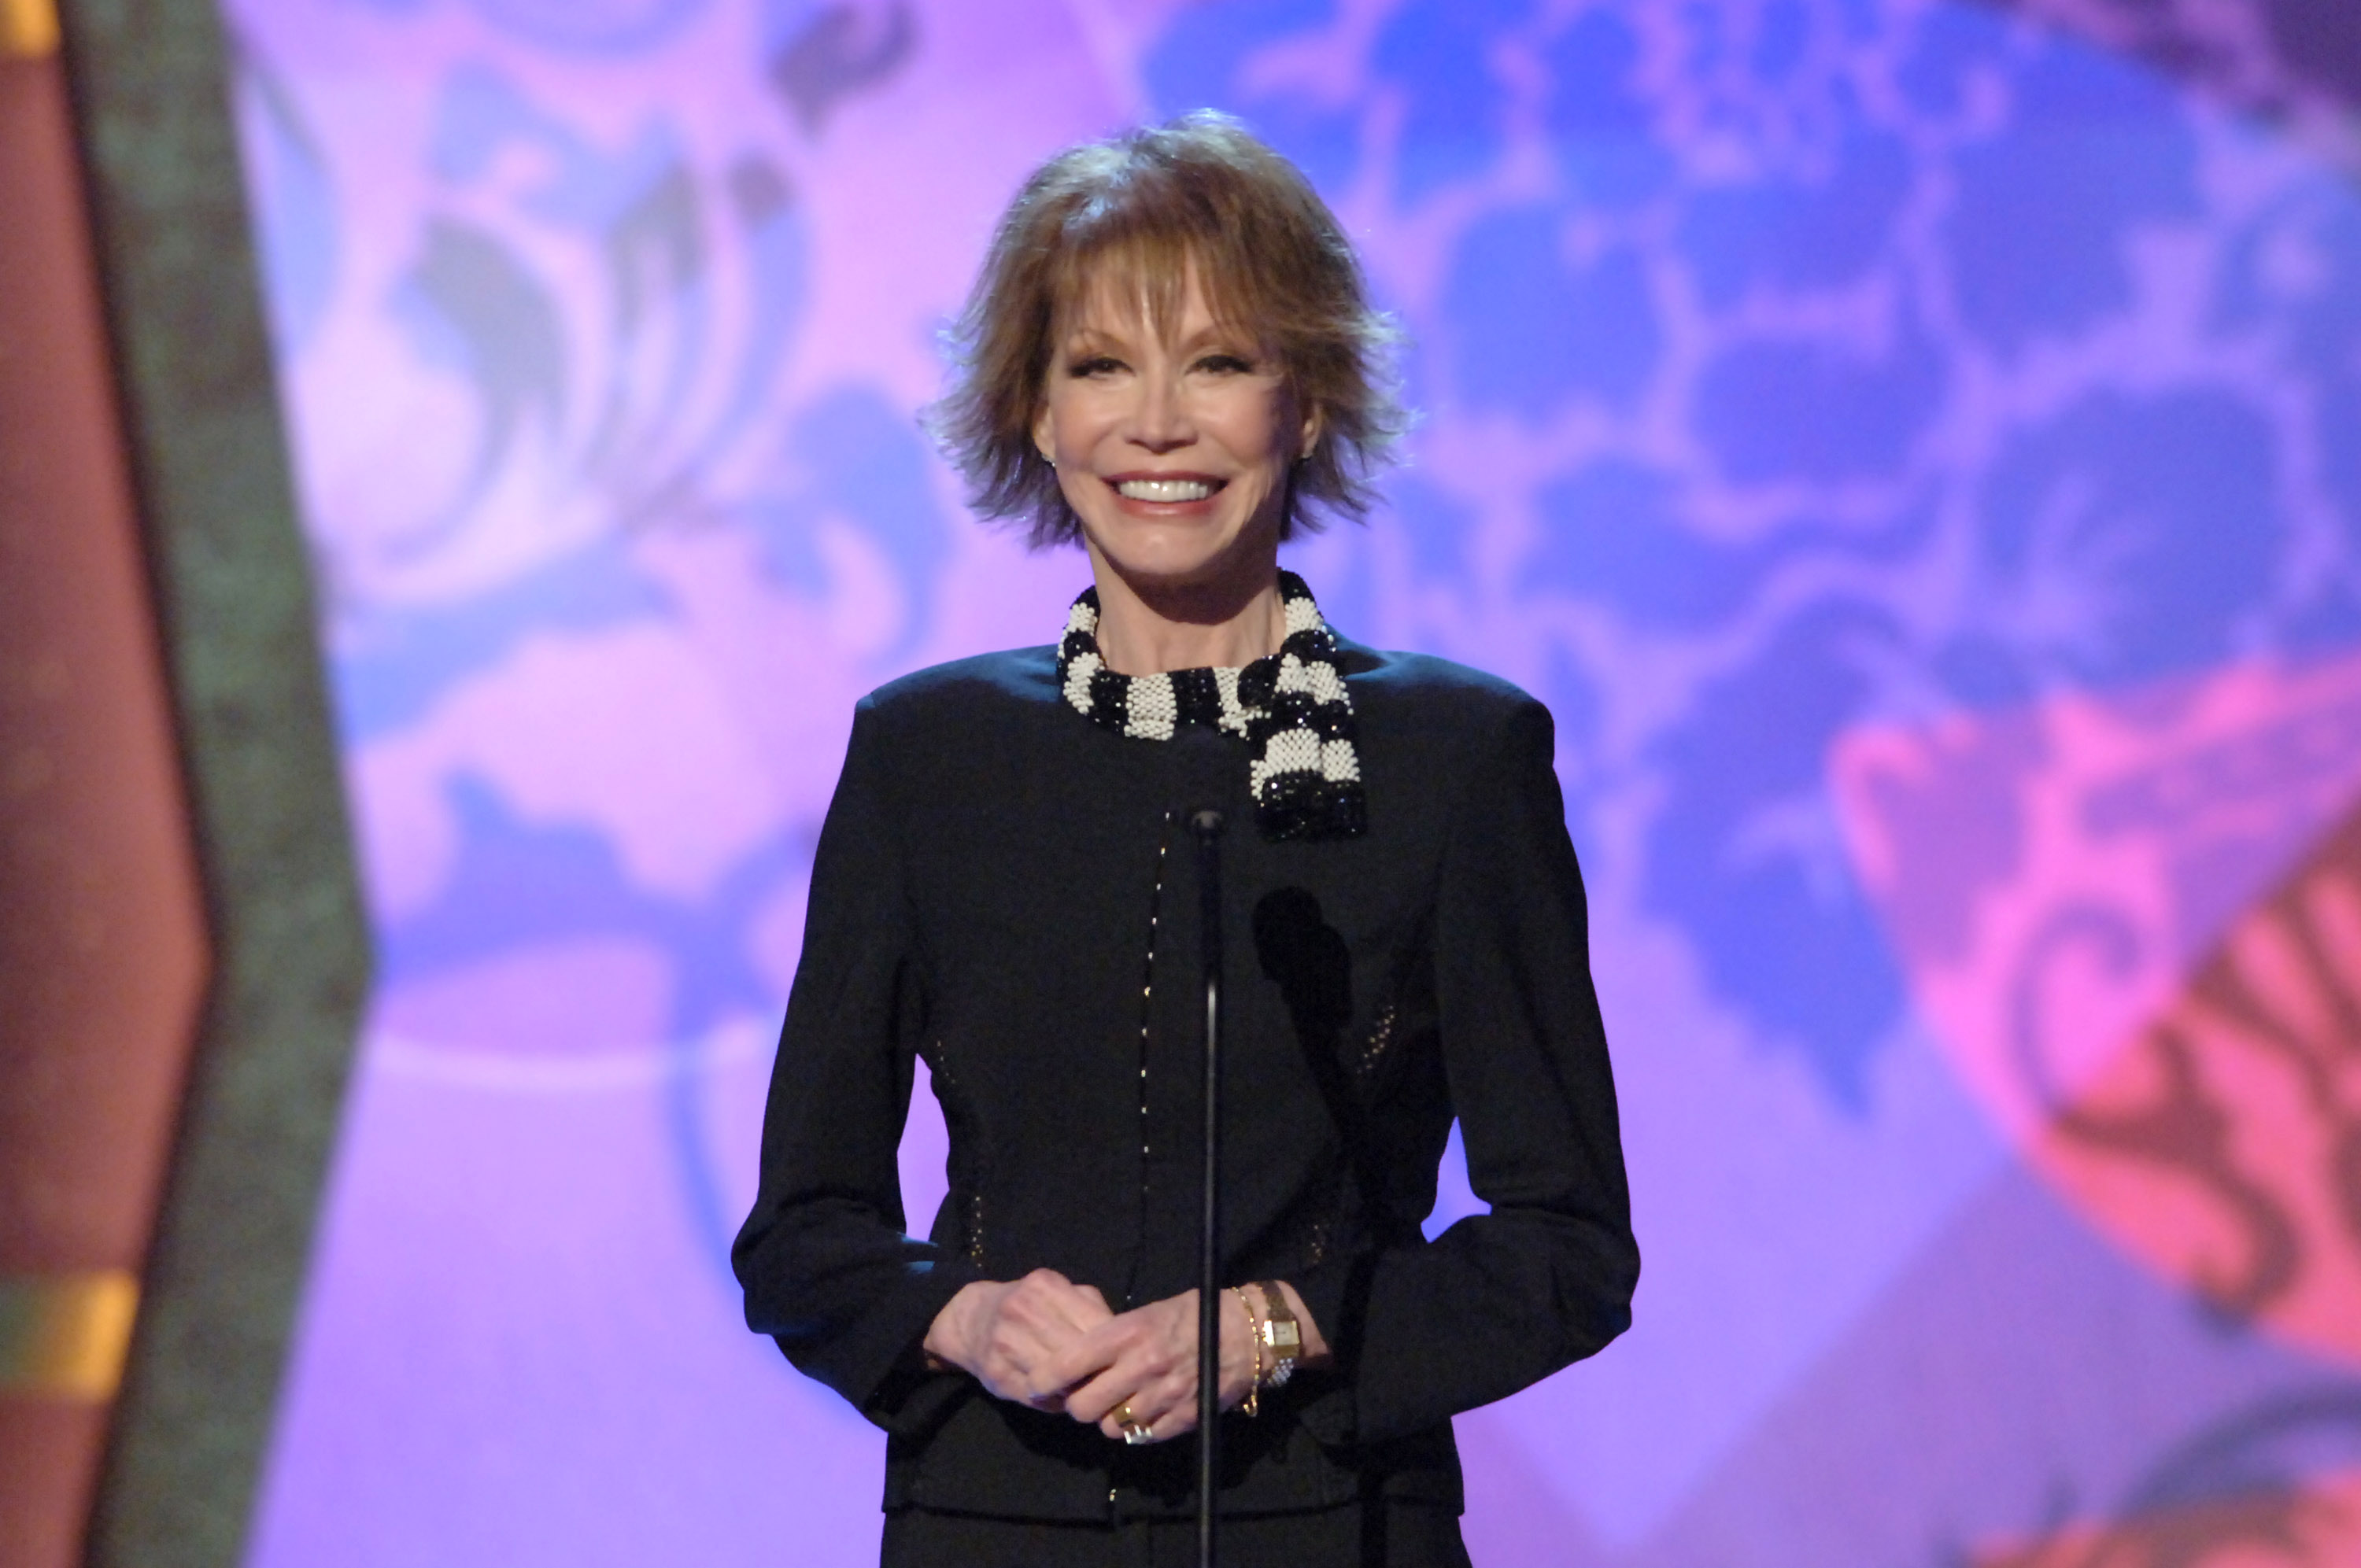 Mary Tyler Moore presenting during the 4th Annual TV Land Awards at Barker Hangar in Santa Monica, California. | Source: Getty Images